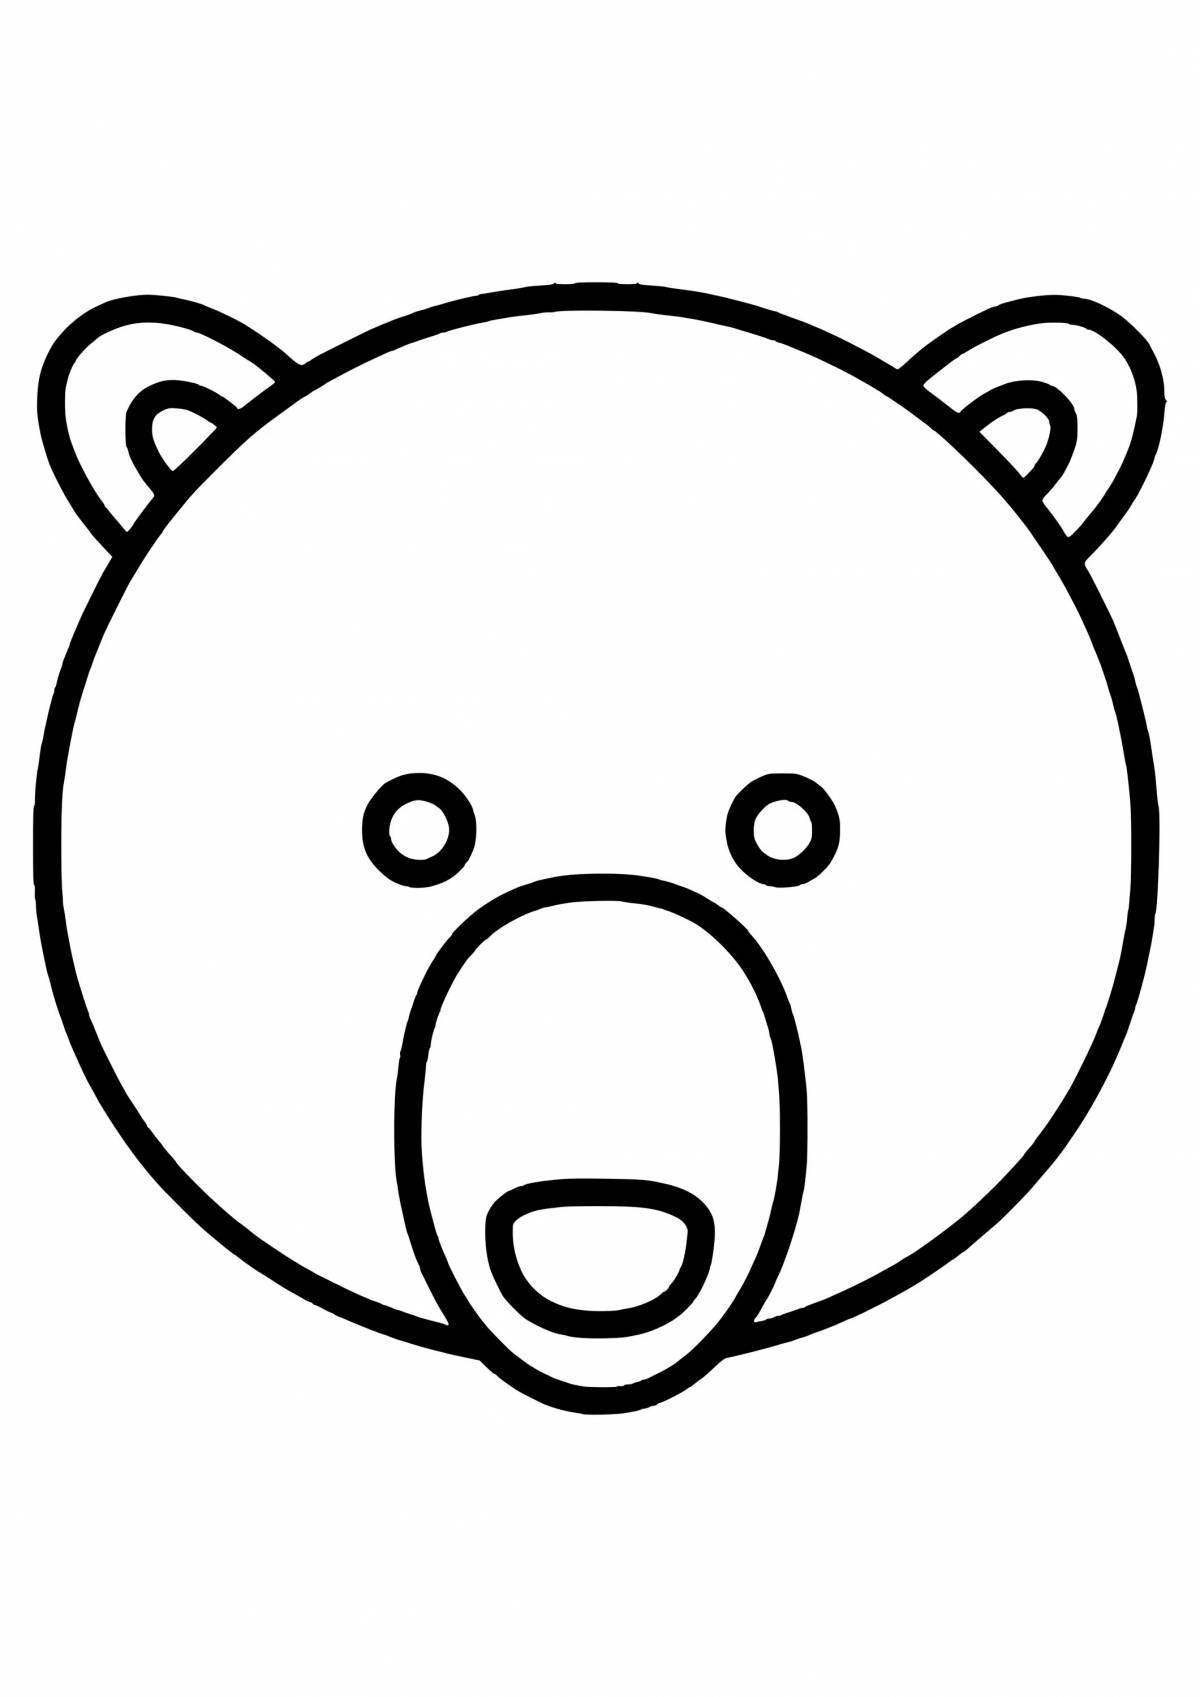 Smiling bear face coloring page